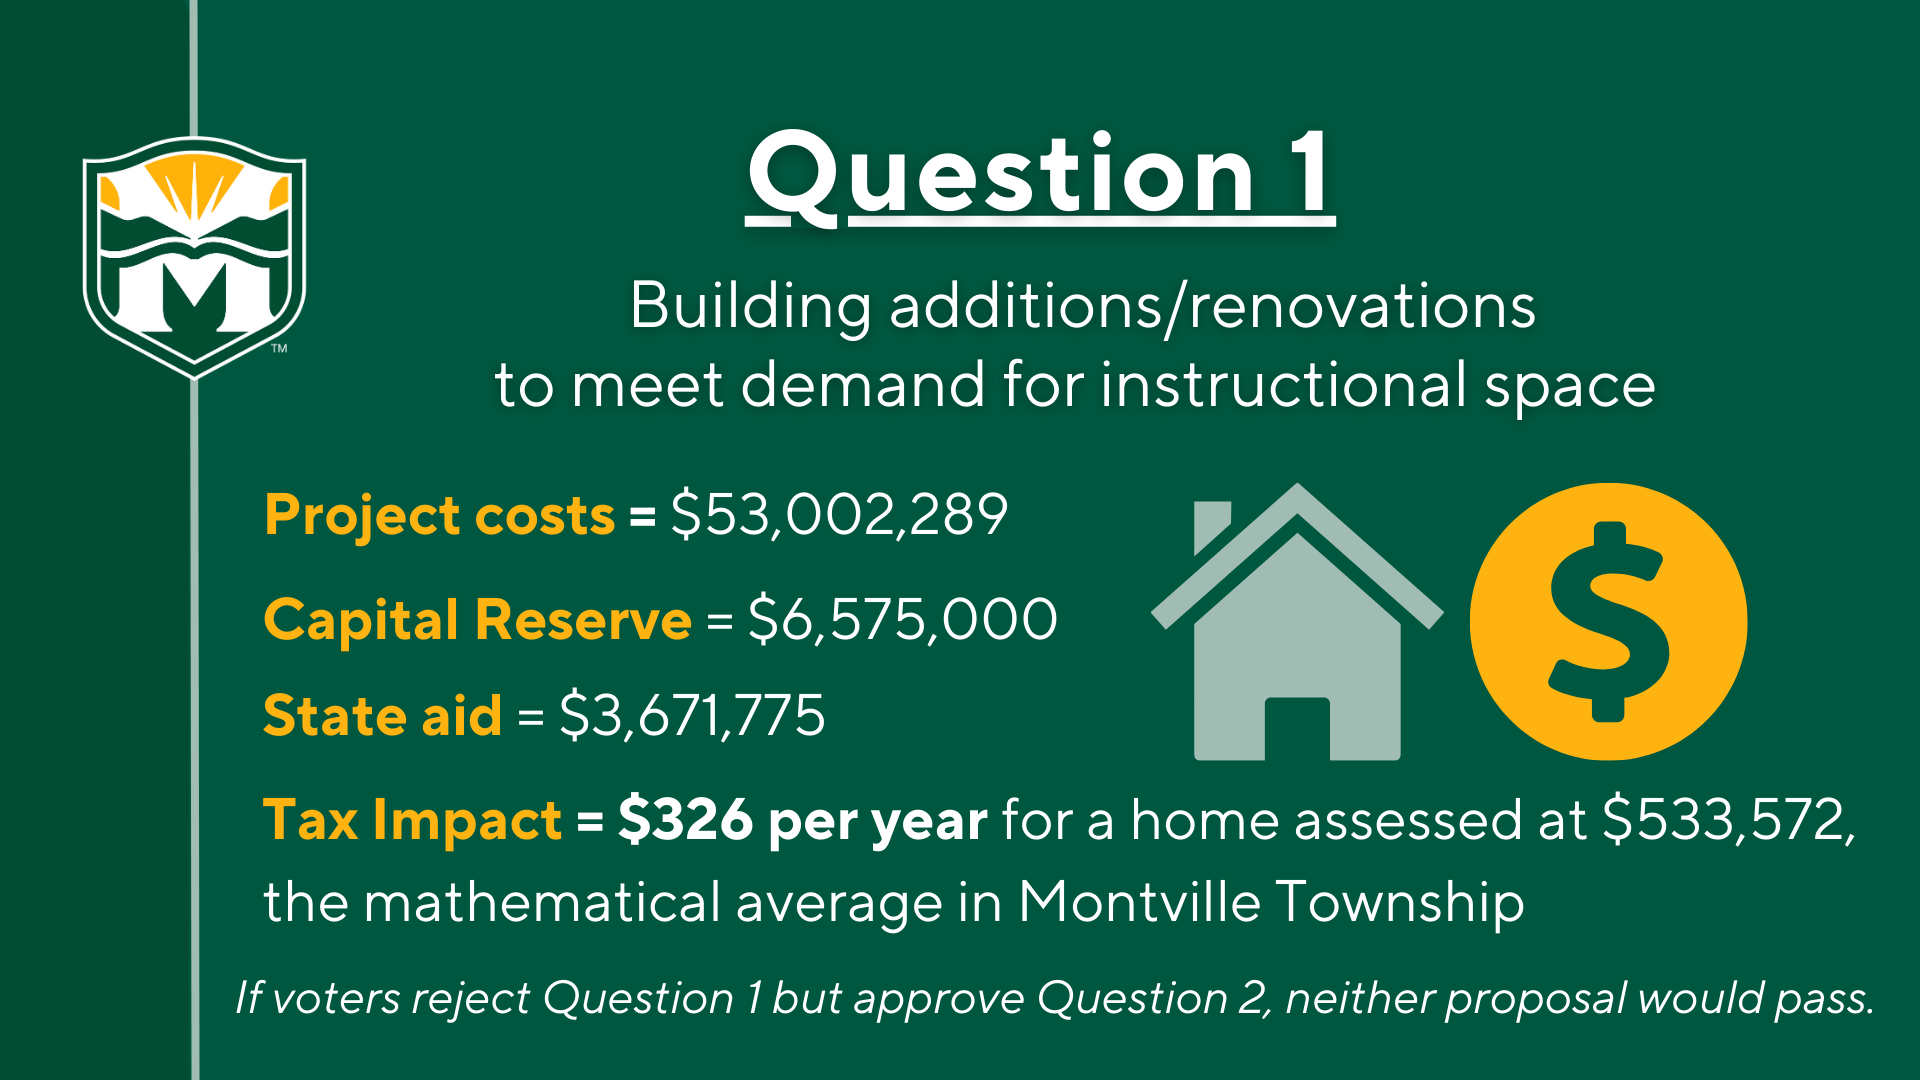 Question 1: Building additions/renovations to meet demand for instructional space. Project costs = $53,002,289. Capital Reserve = $6,575,000. State aid = $3,671,775. Tax impact = $326 per year for a home assessed at $533,572, the mathematical average in Montville Township. If voters reject Question 1 but approve Question 2, neither proposal would pass.